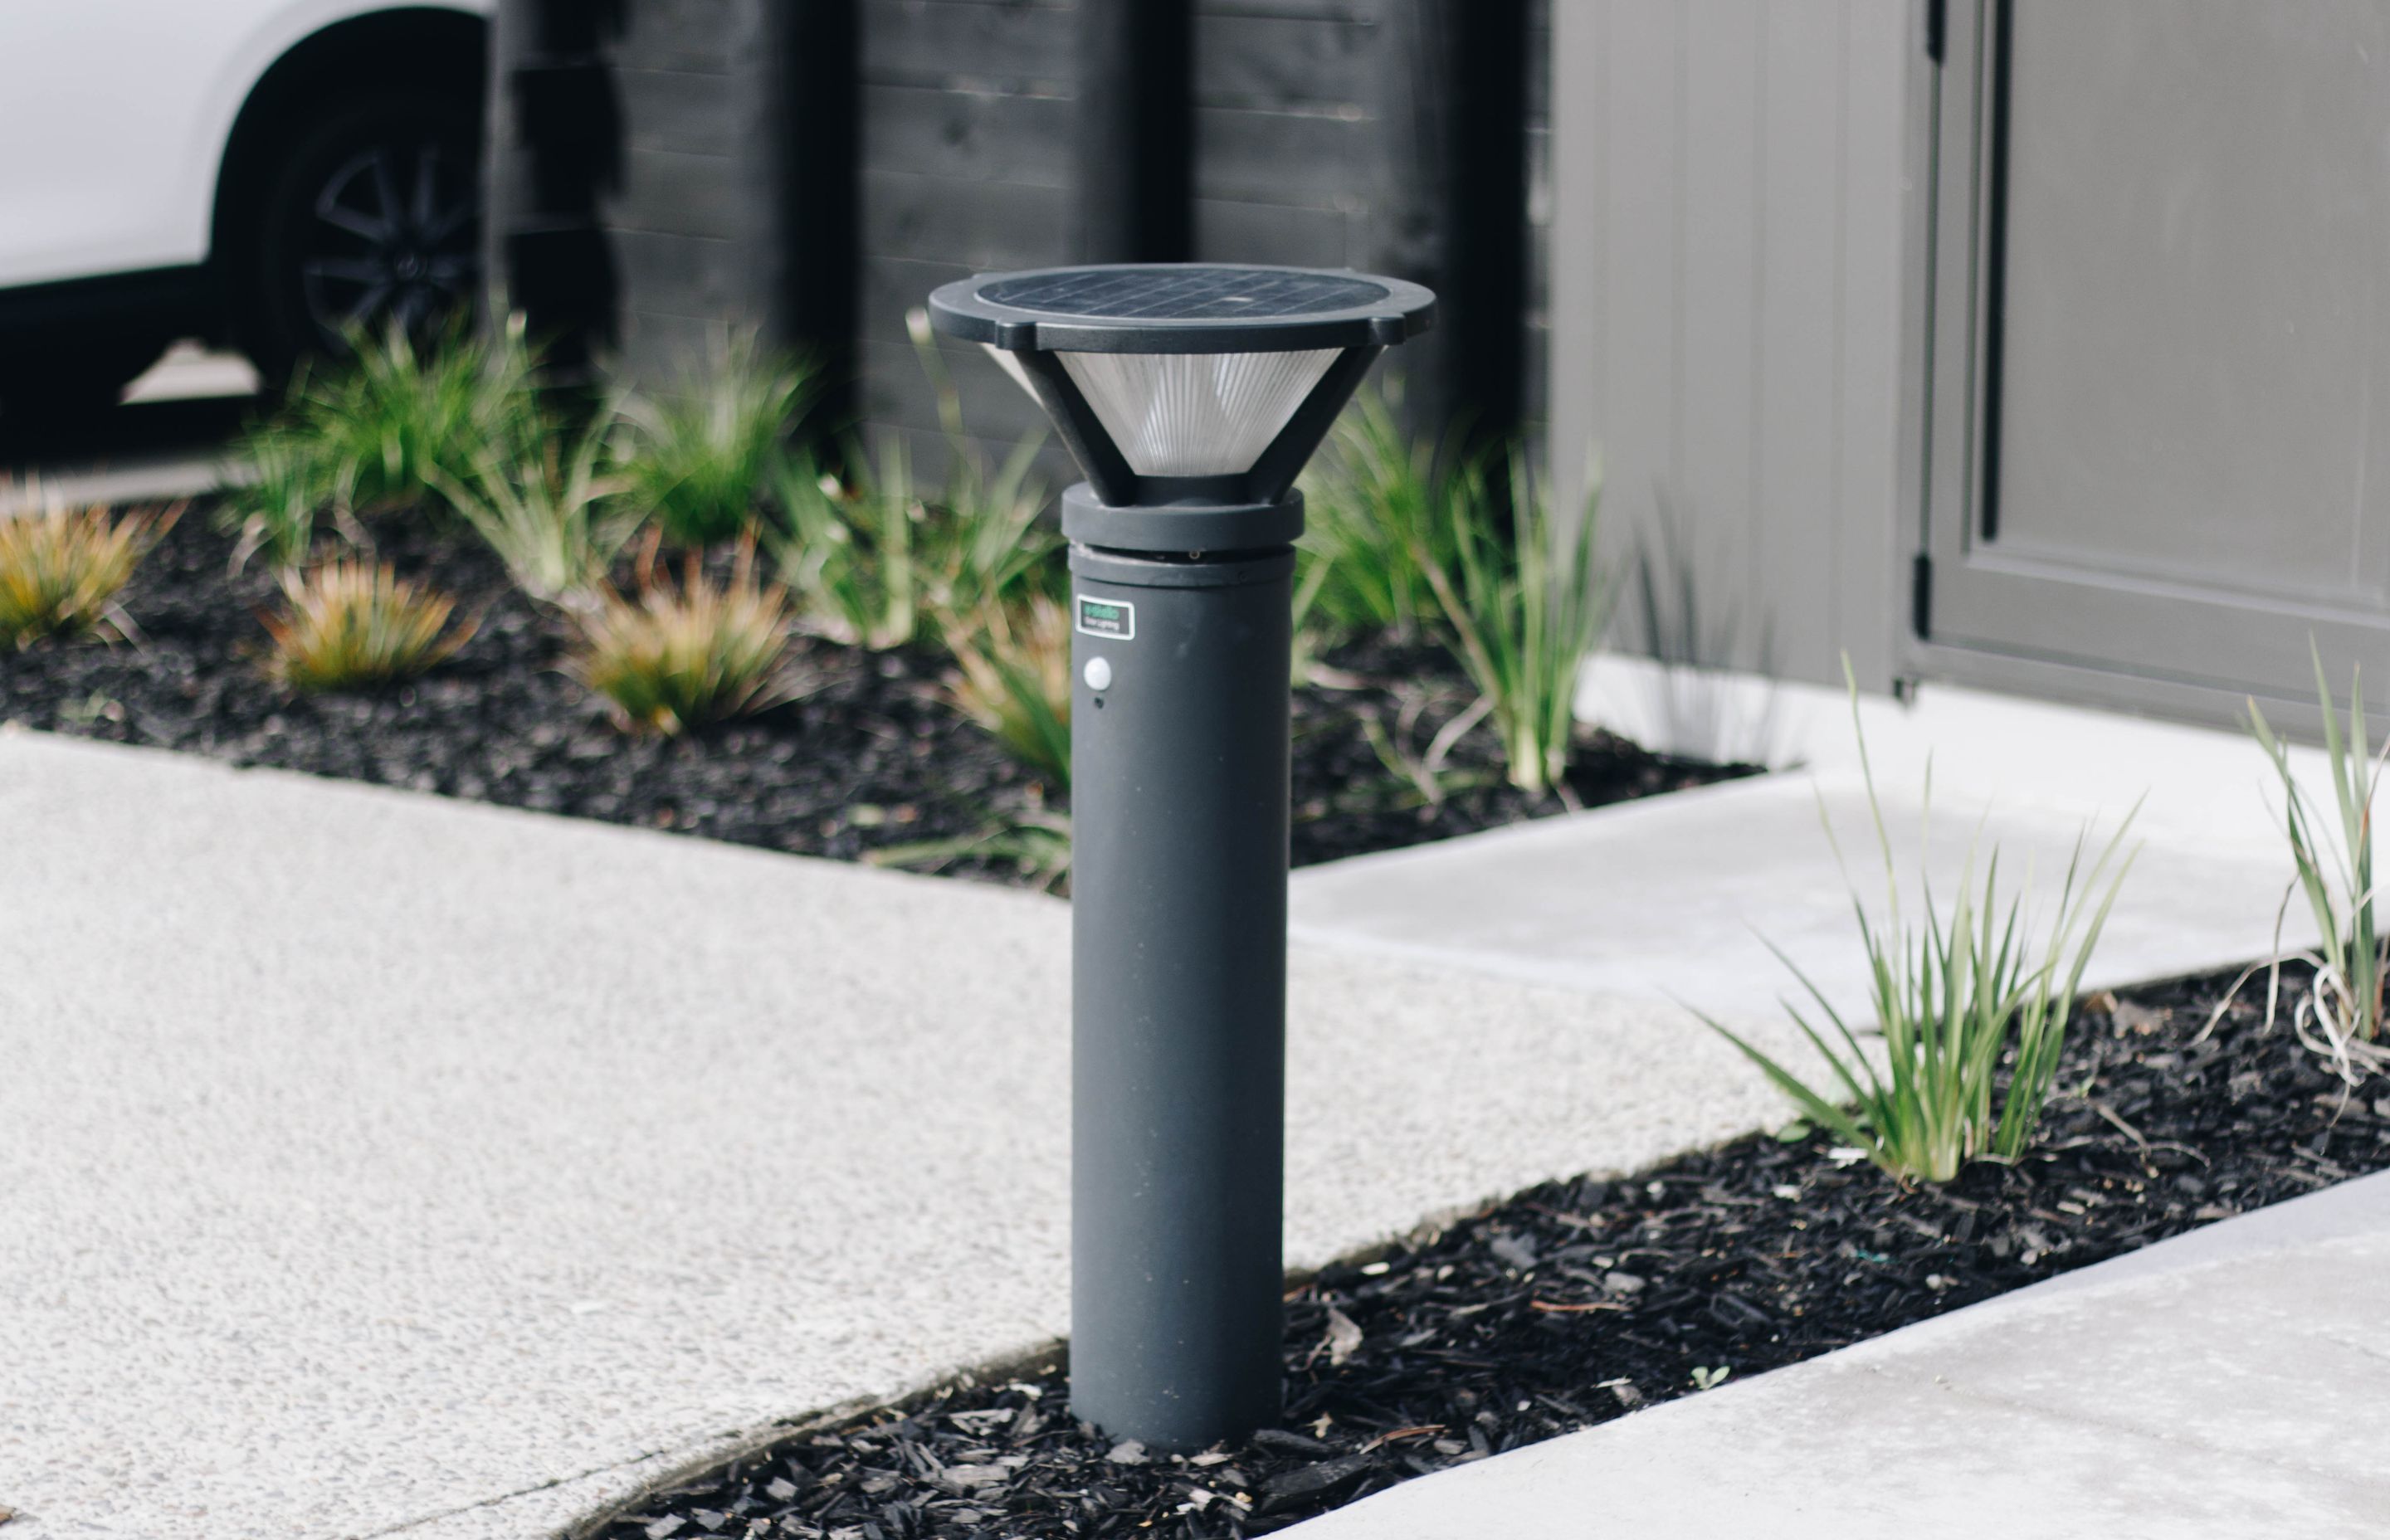 Featuring a compact, robust design, the Sentry Bollard 005 is ideal for providing orientation and for facilitating safe movement for pedestrians in a range of settings.